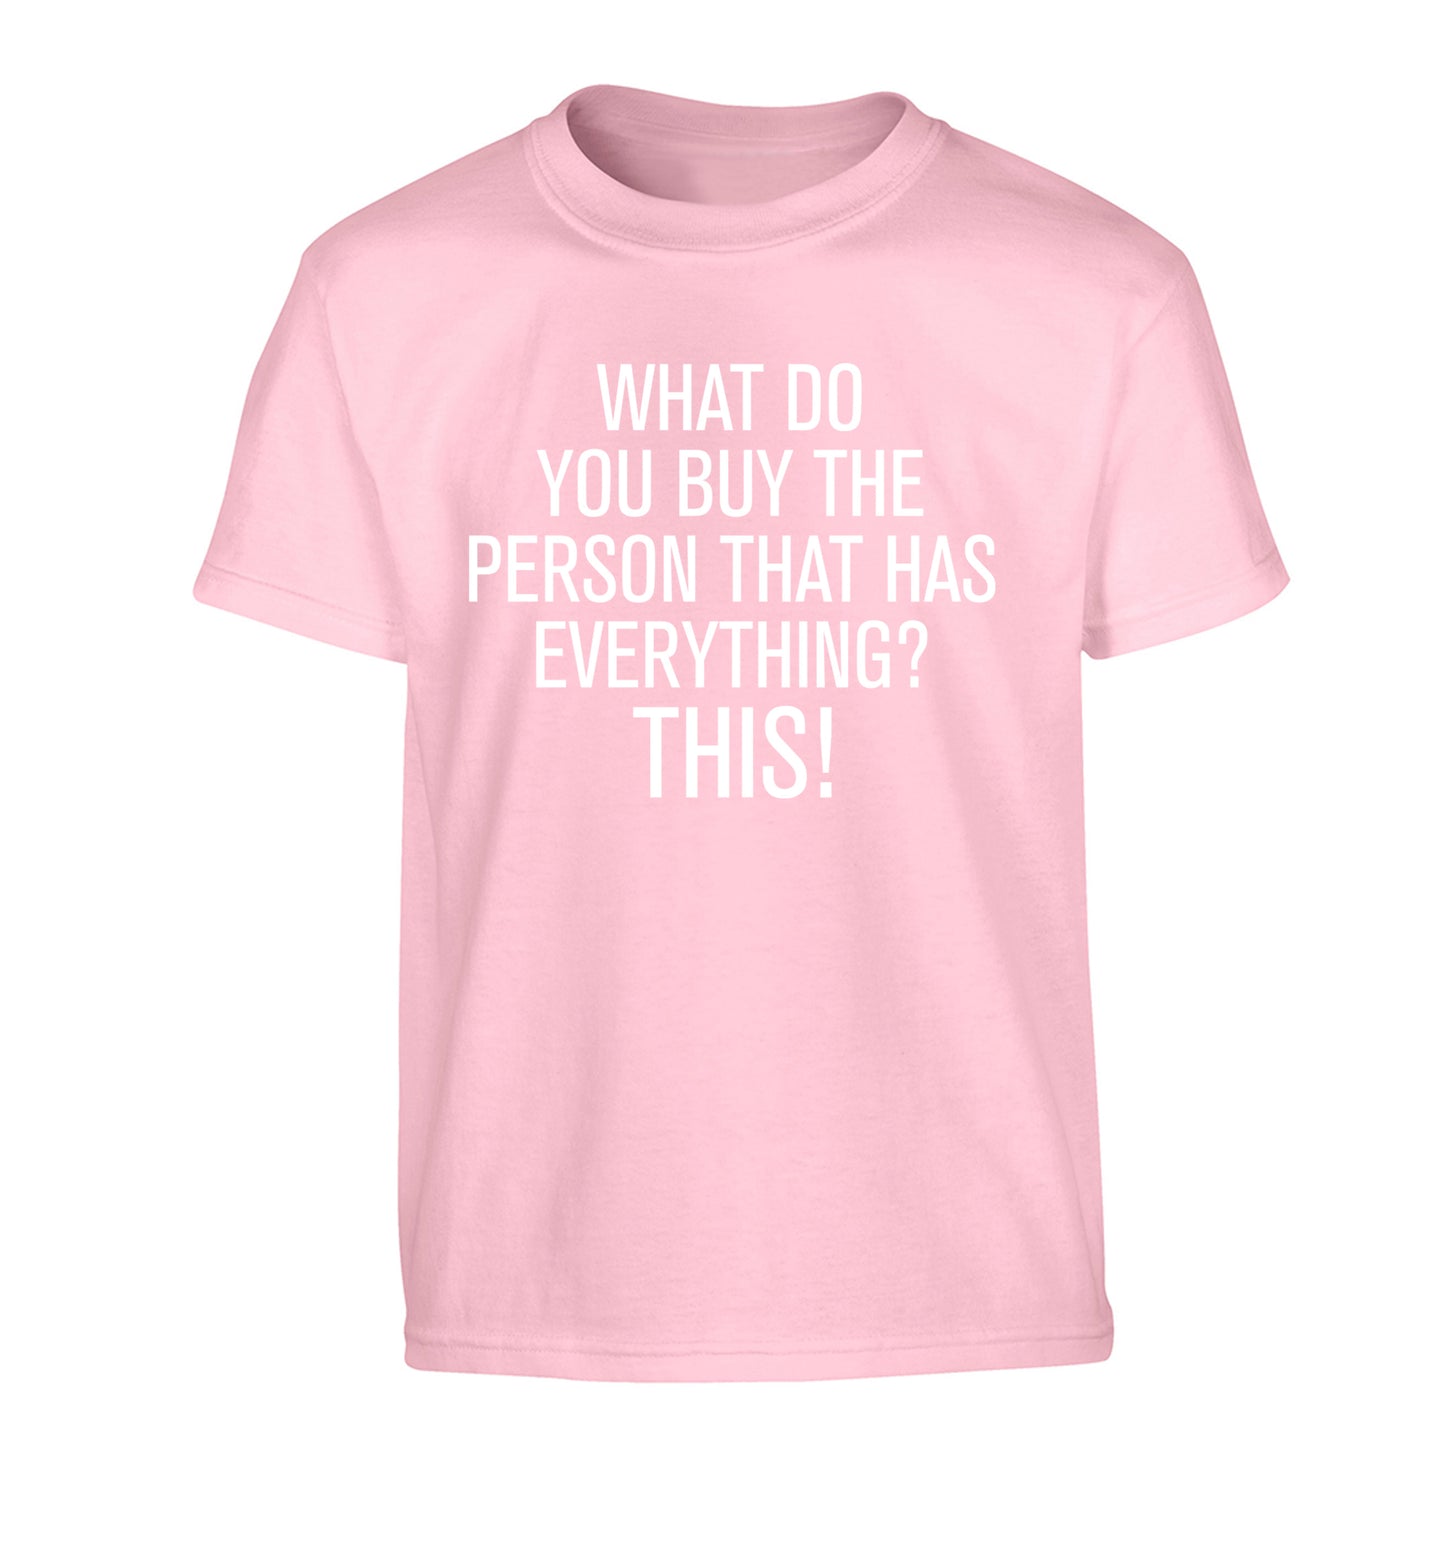 What do you buy the person that has everything? This! Children's light pink Tshirt 12-13 Years